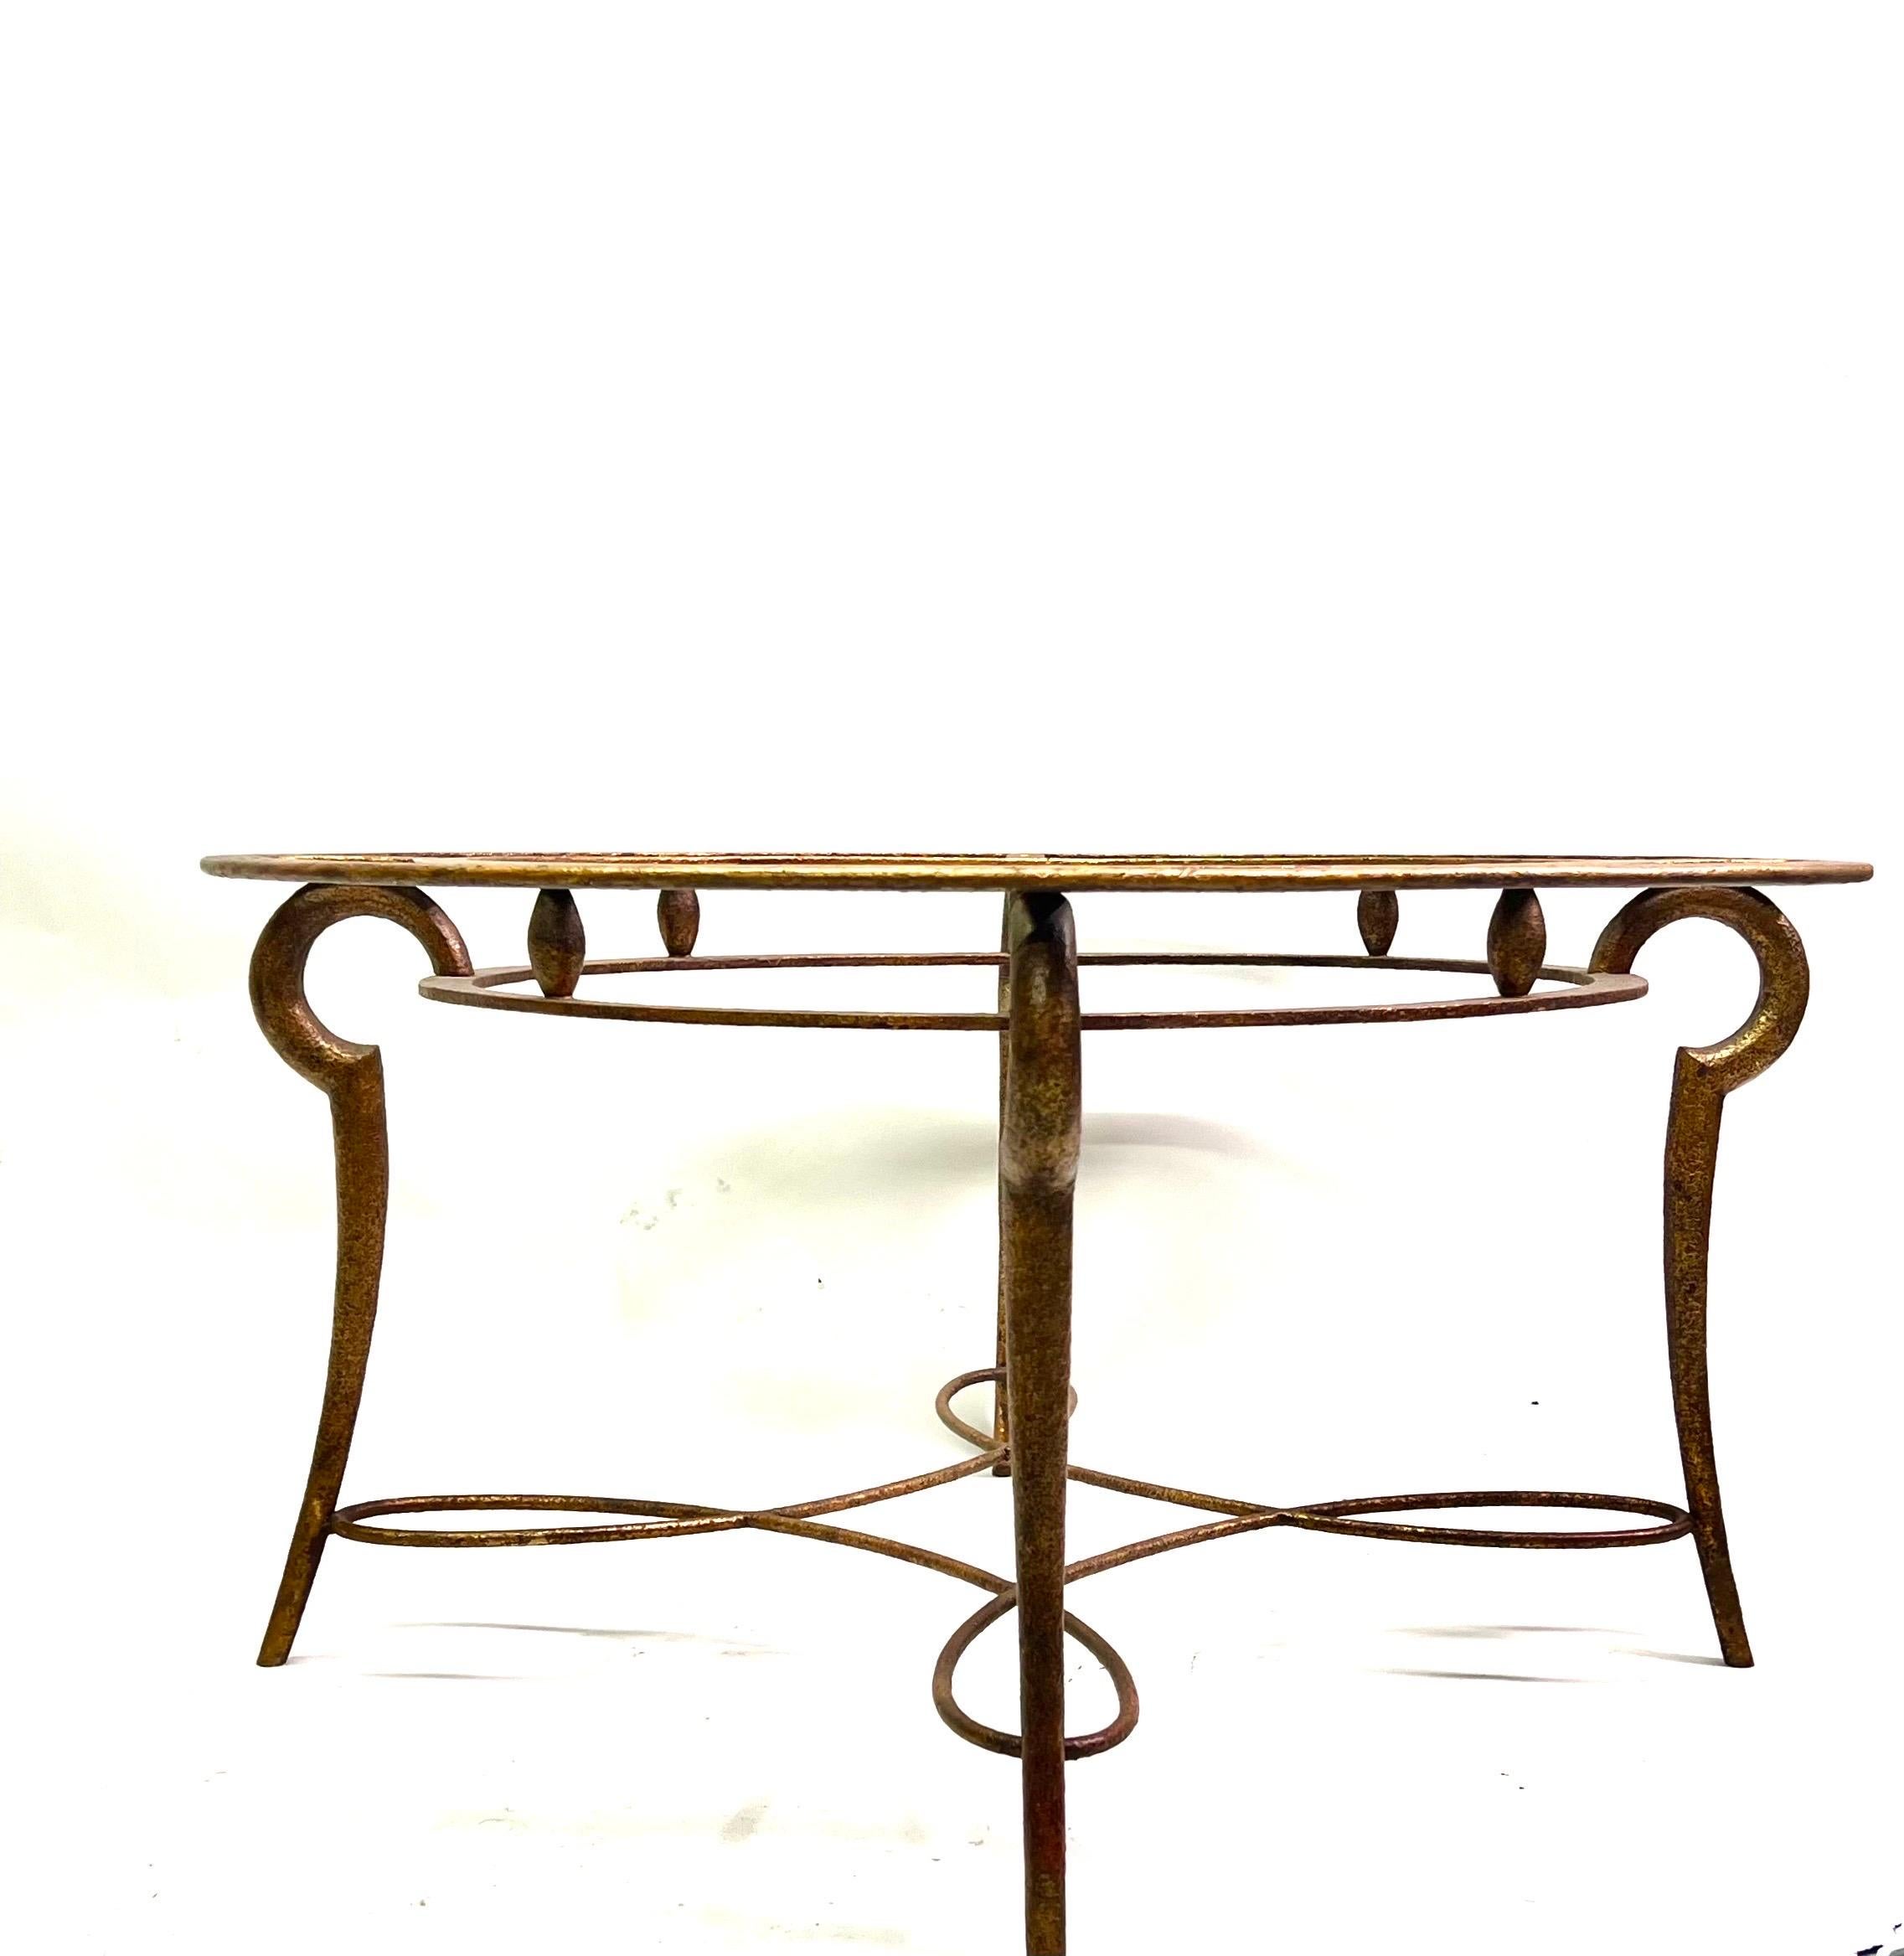 Mid-20th Century French Midcentury / Art Deco Gilt Wrought Iron Coffee Table by Rene Drouet, 1940 For Sale